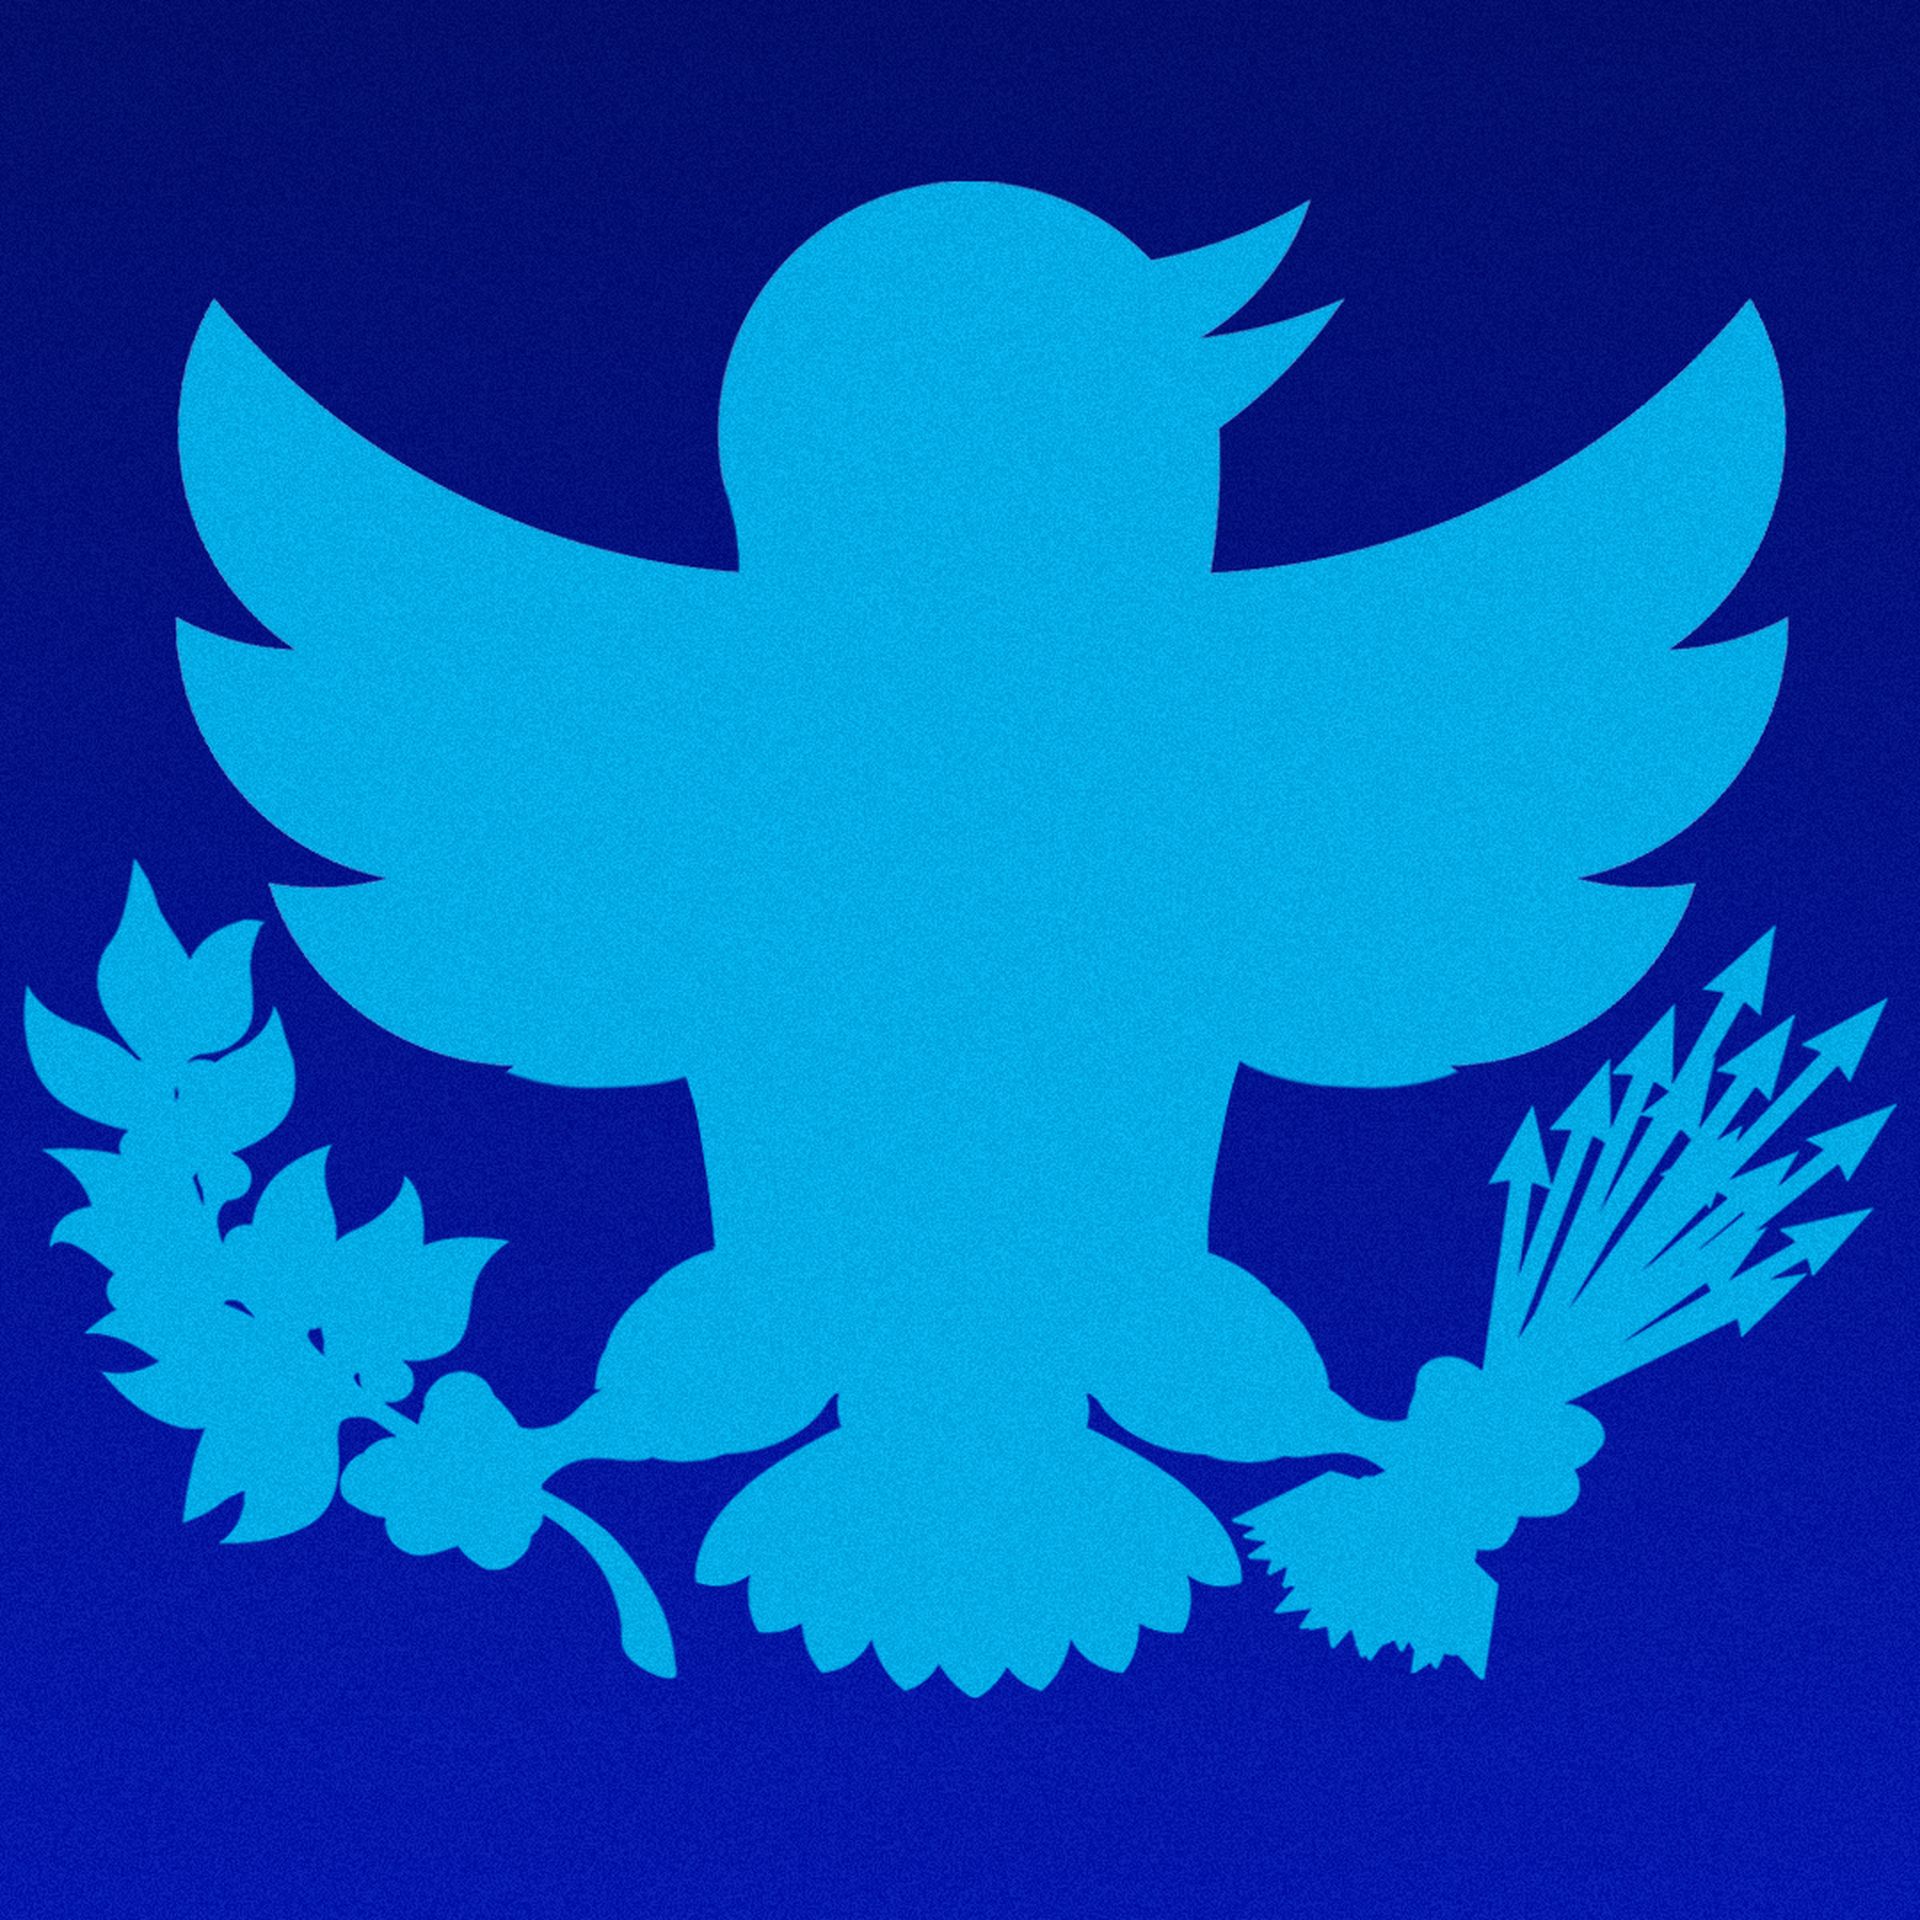 Illustration of the twitter logo modified to look like a a U.S. eagle with an olive branch and arrows